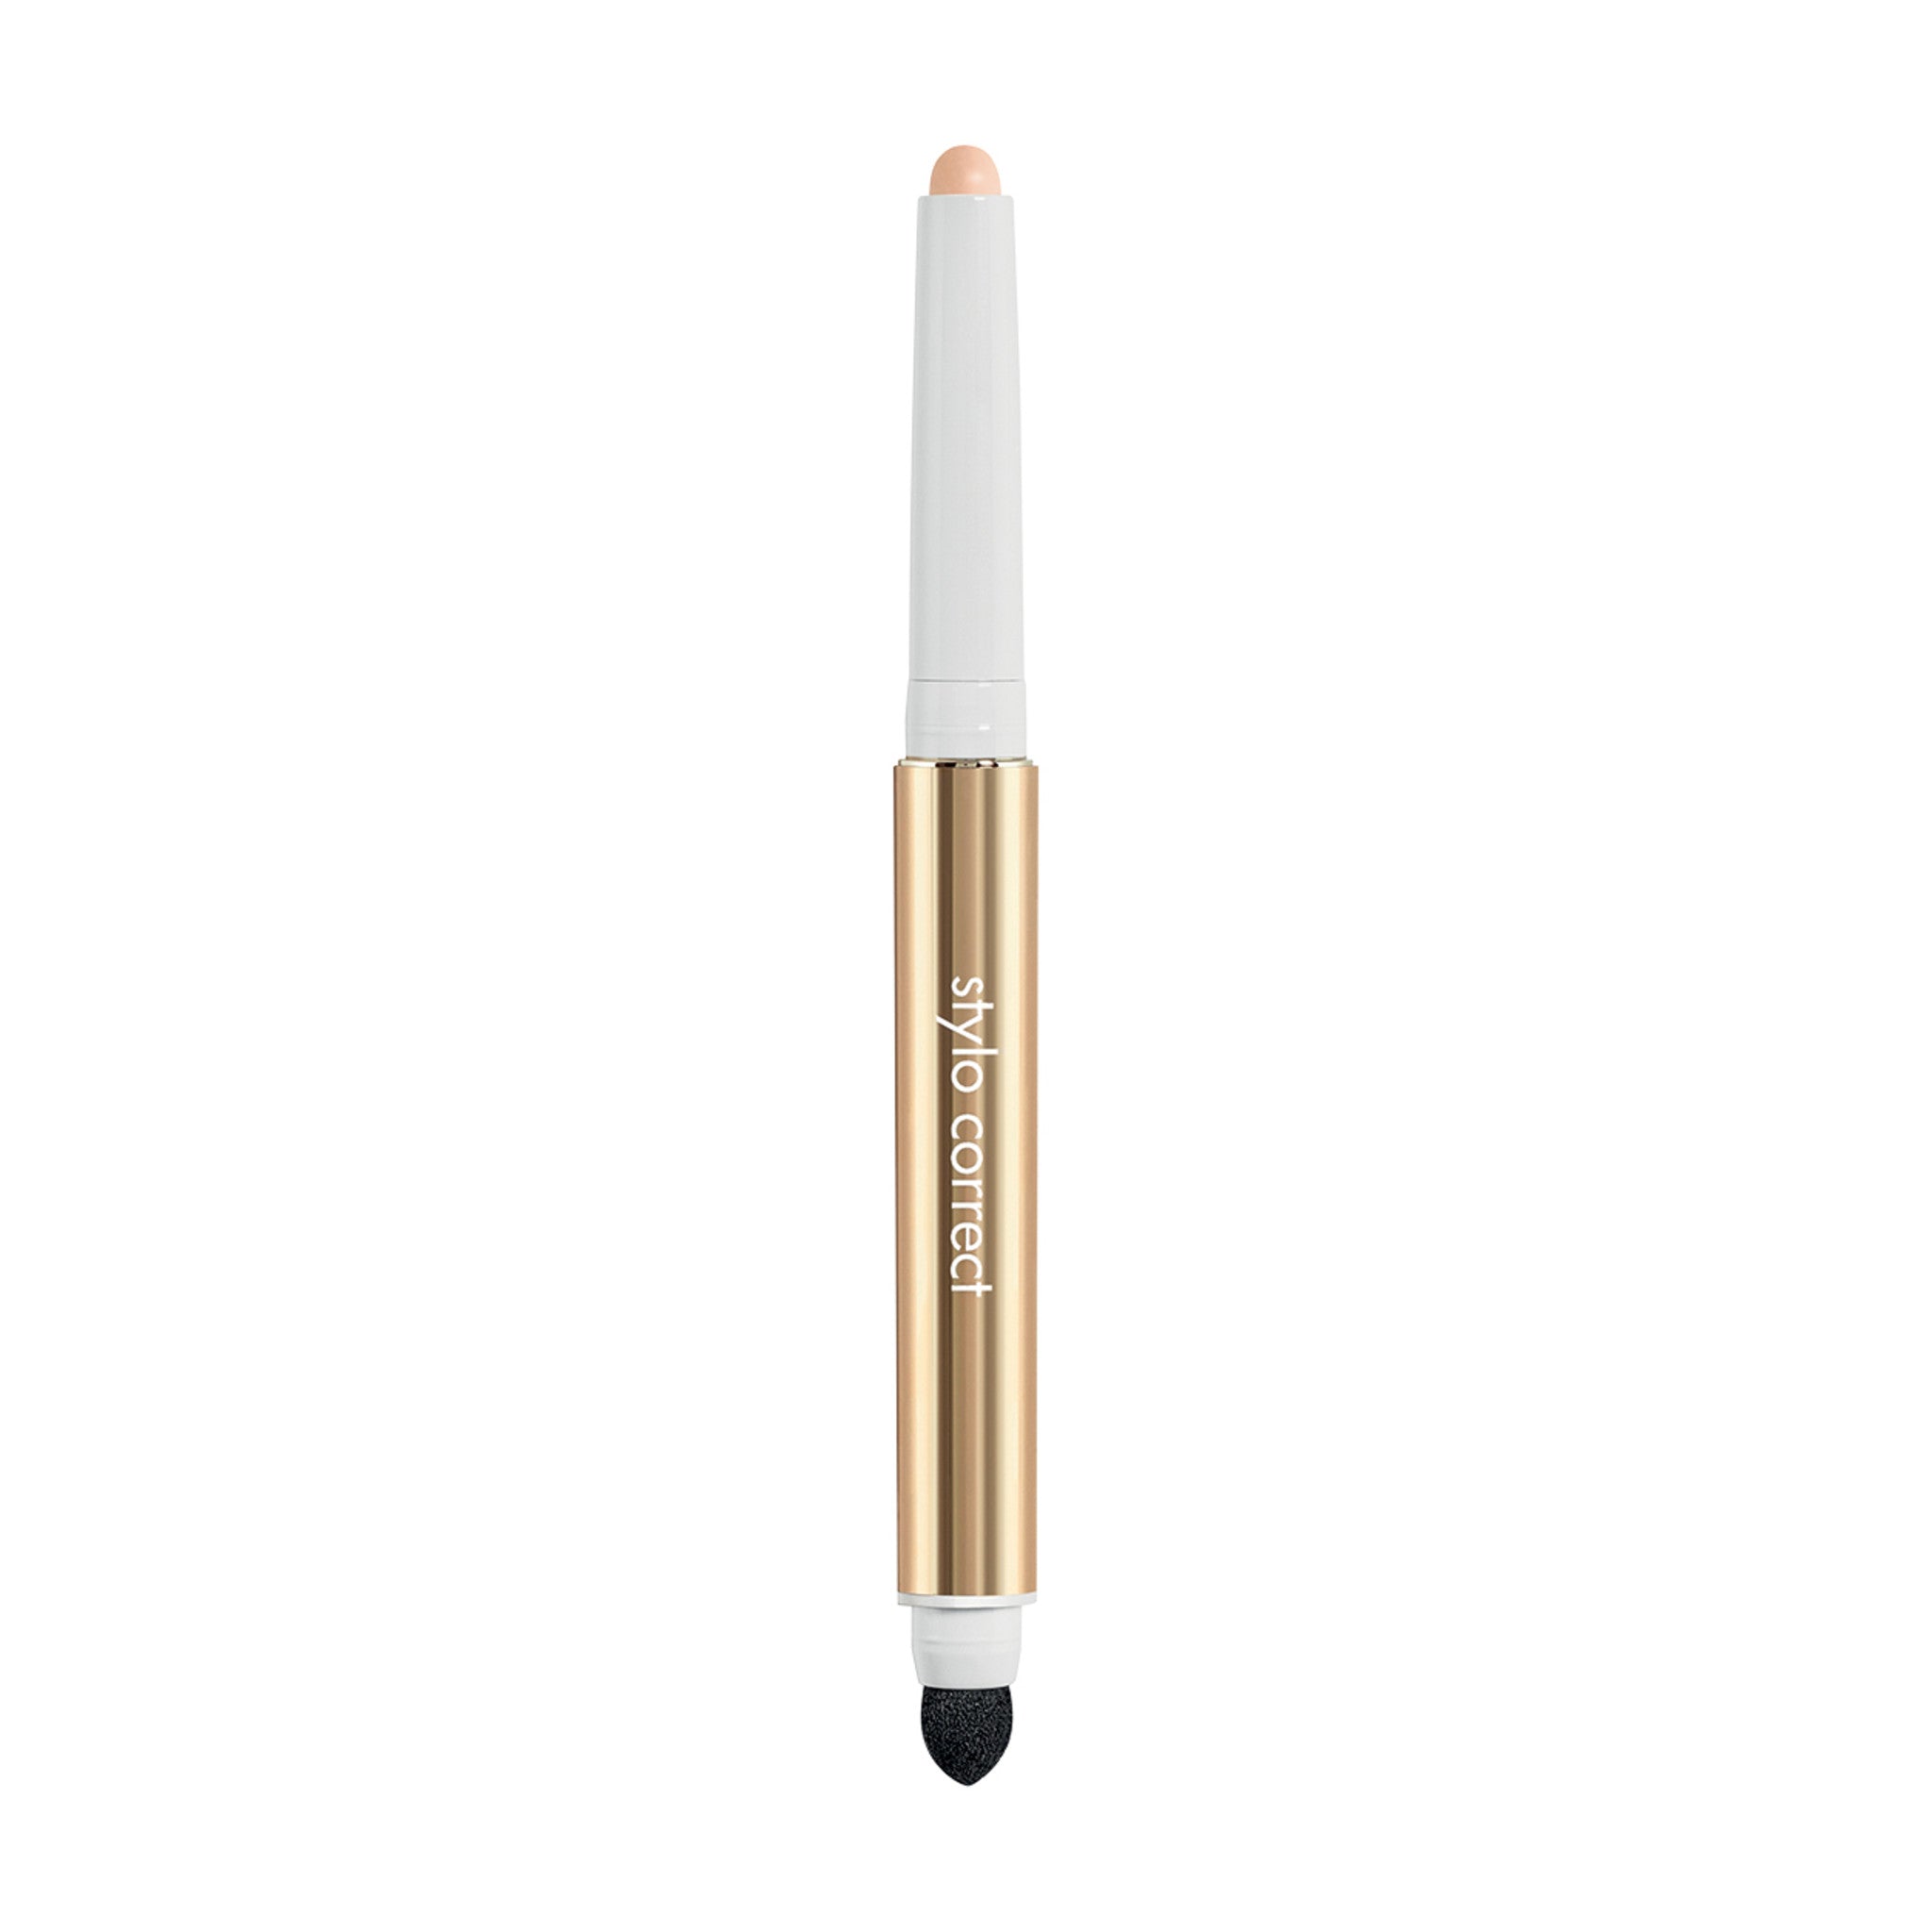 Sisley-Paris Stylo Correct Color/Shade variant: 000 main image. This product is for light neutral complexions